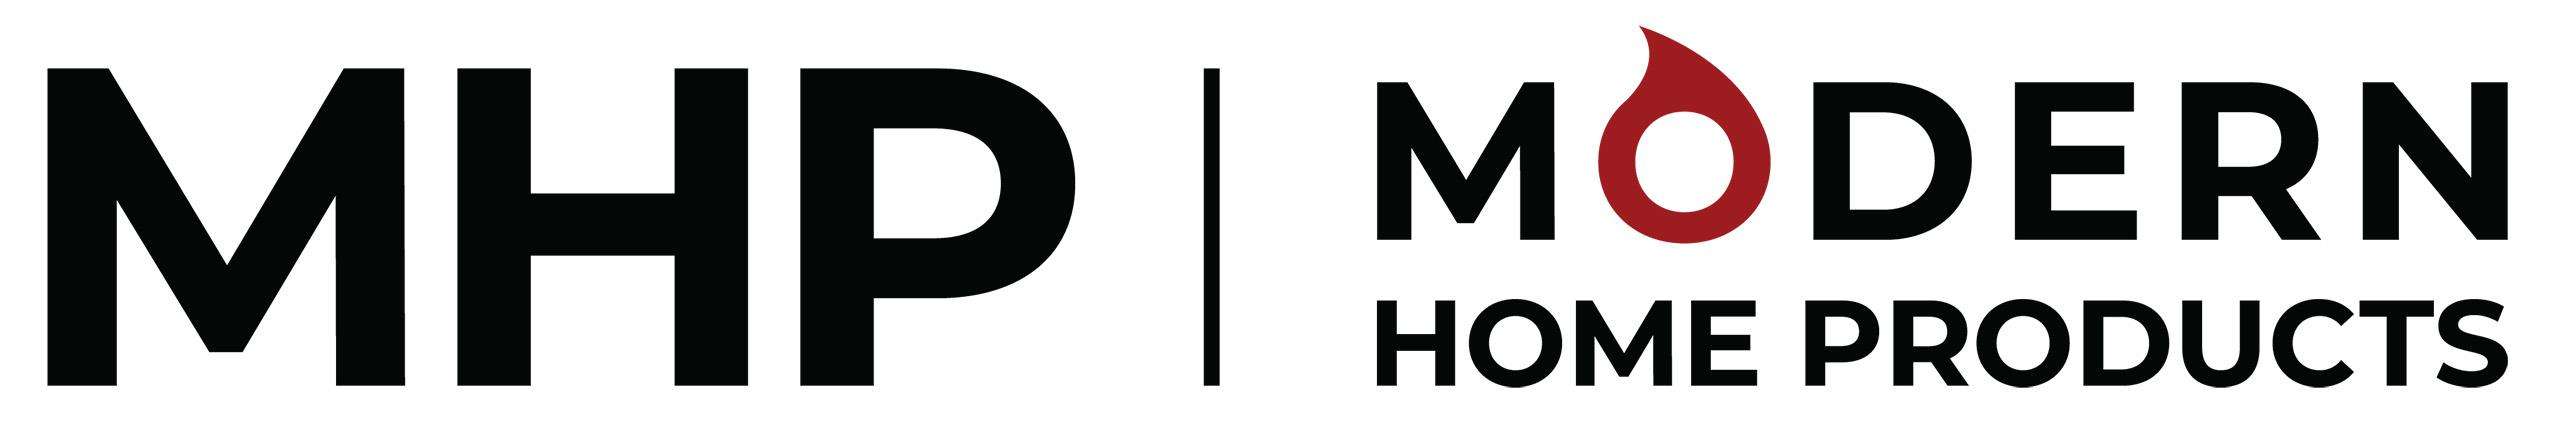 Modern Home Products Corp Logo